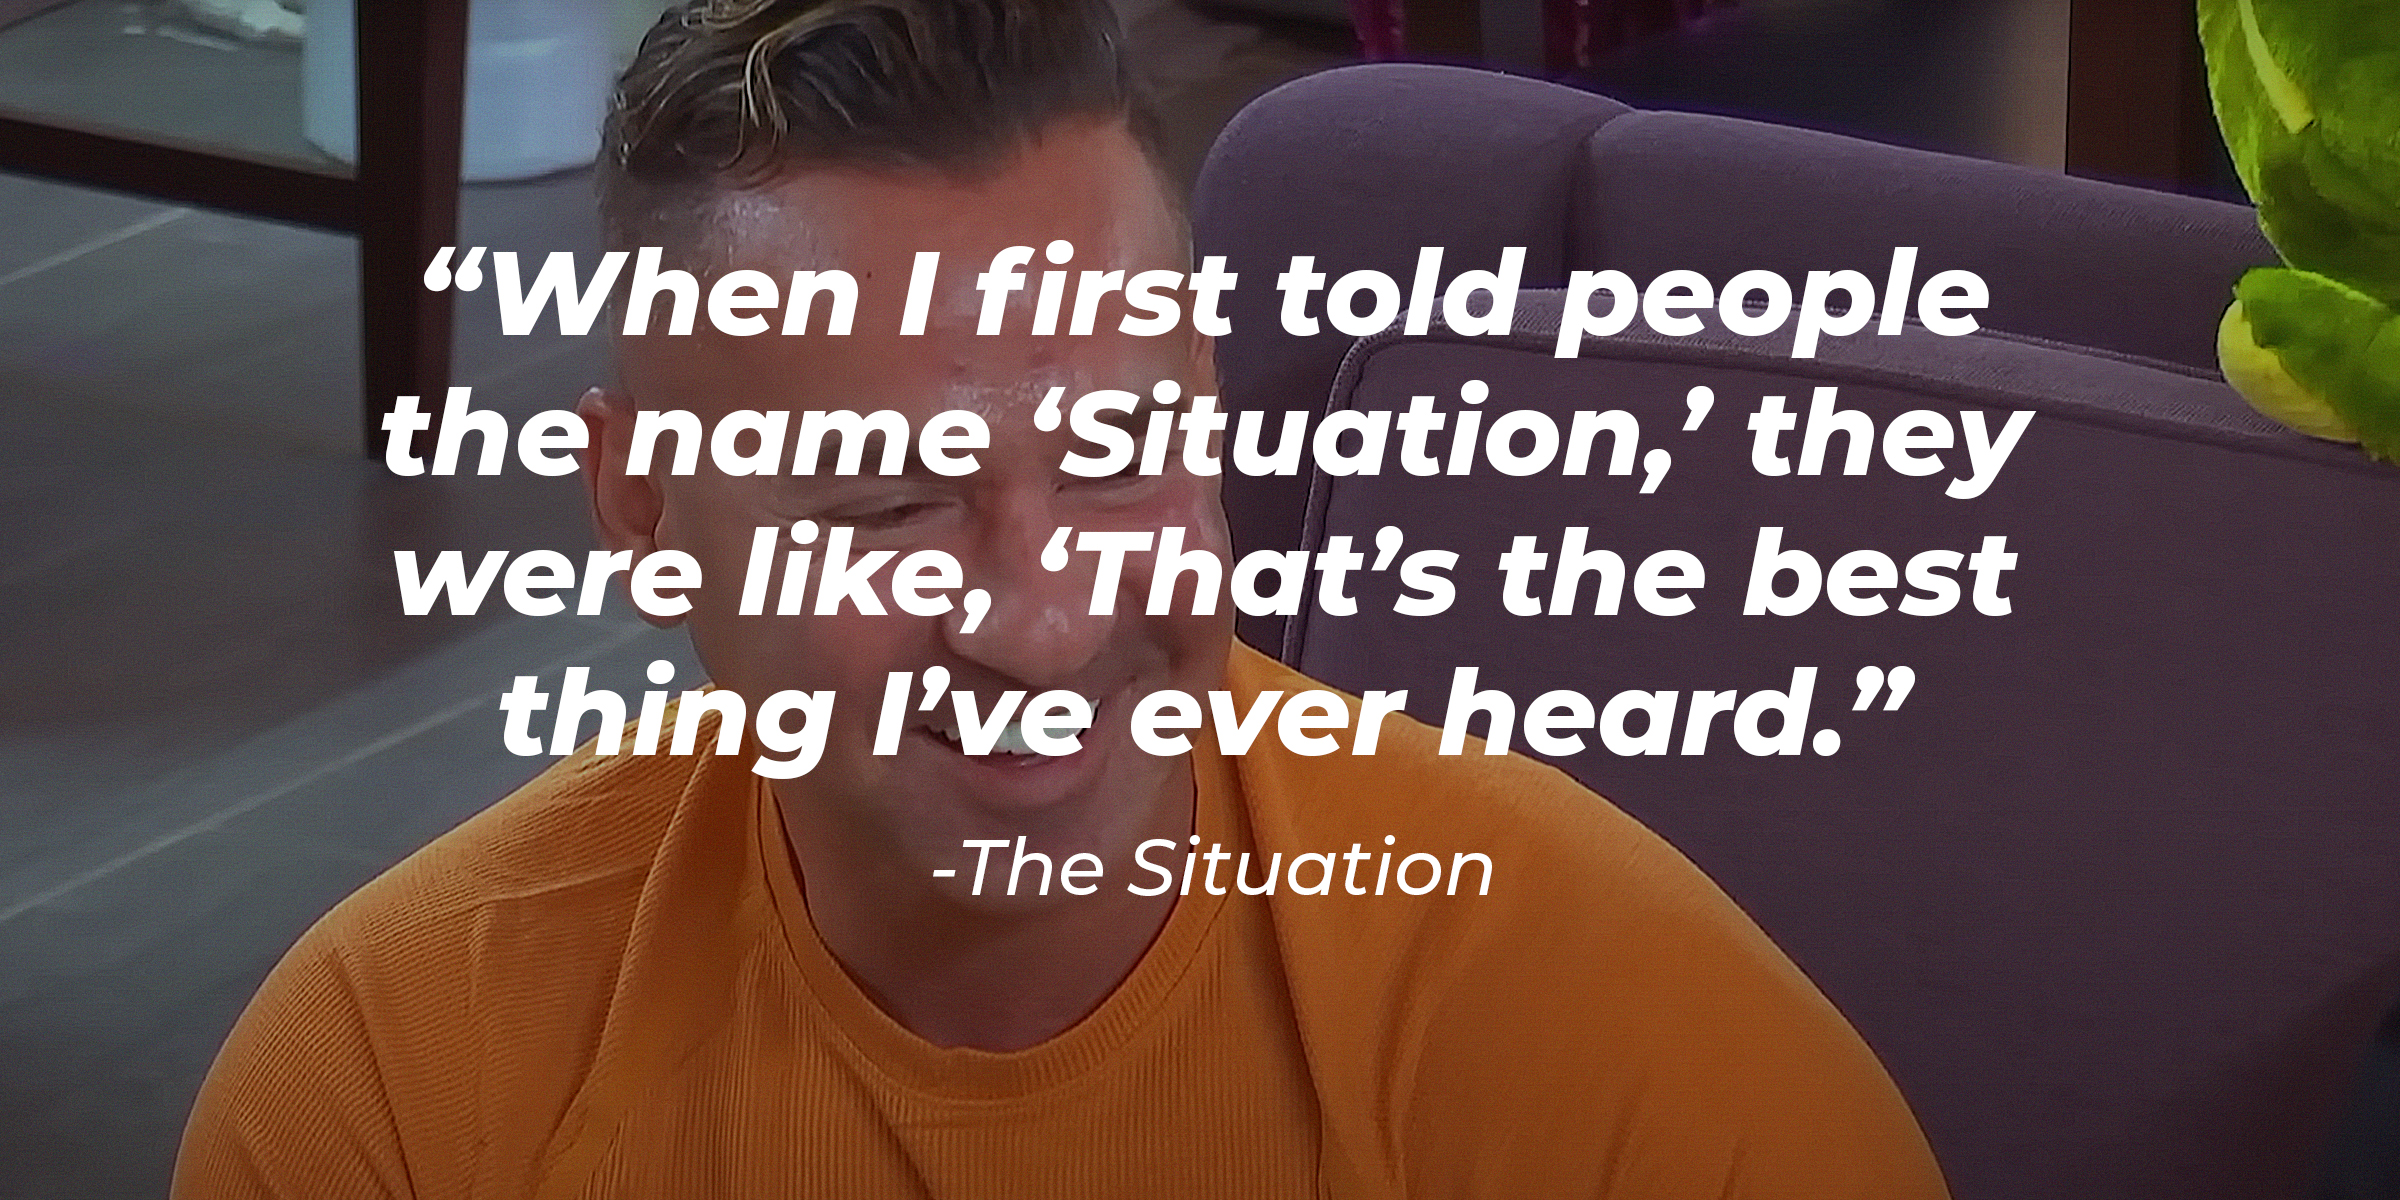 The Situation with his quote: "When I first told people the name 'Situation,' they were like, 'That's the best thing I've ever heard.'" | Source: youtube.com/jerseyshore